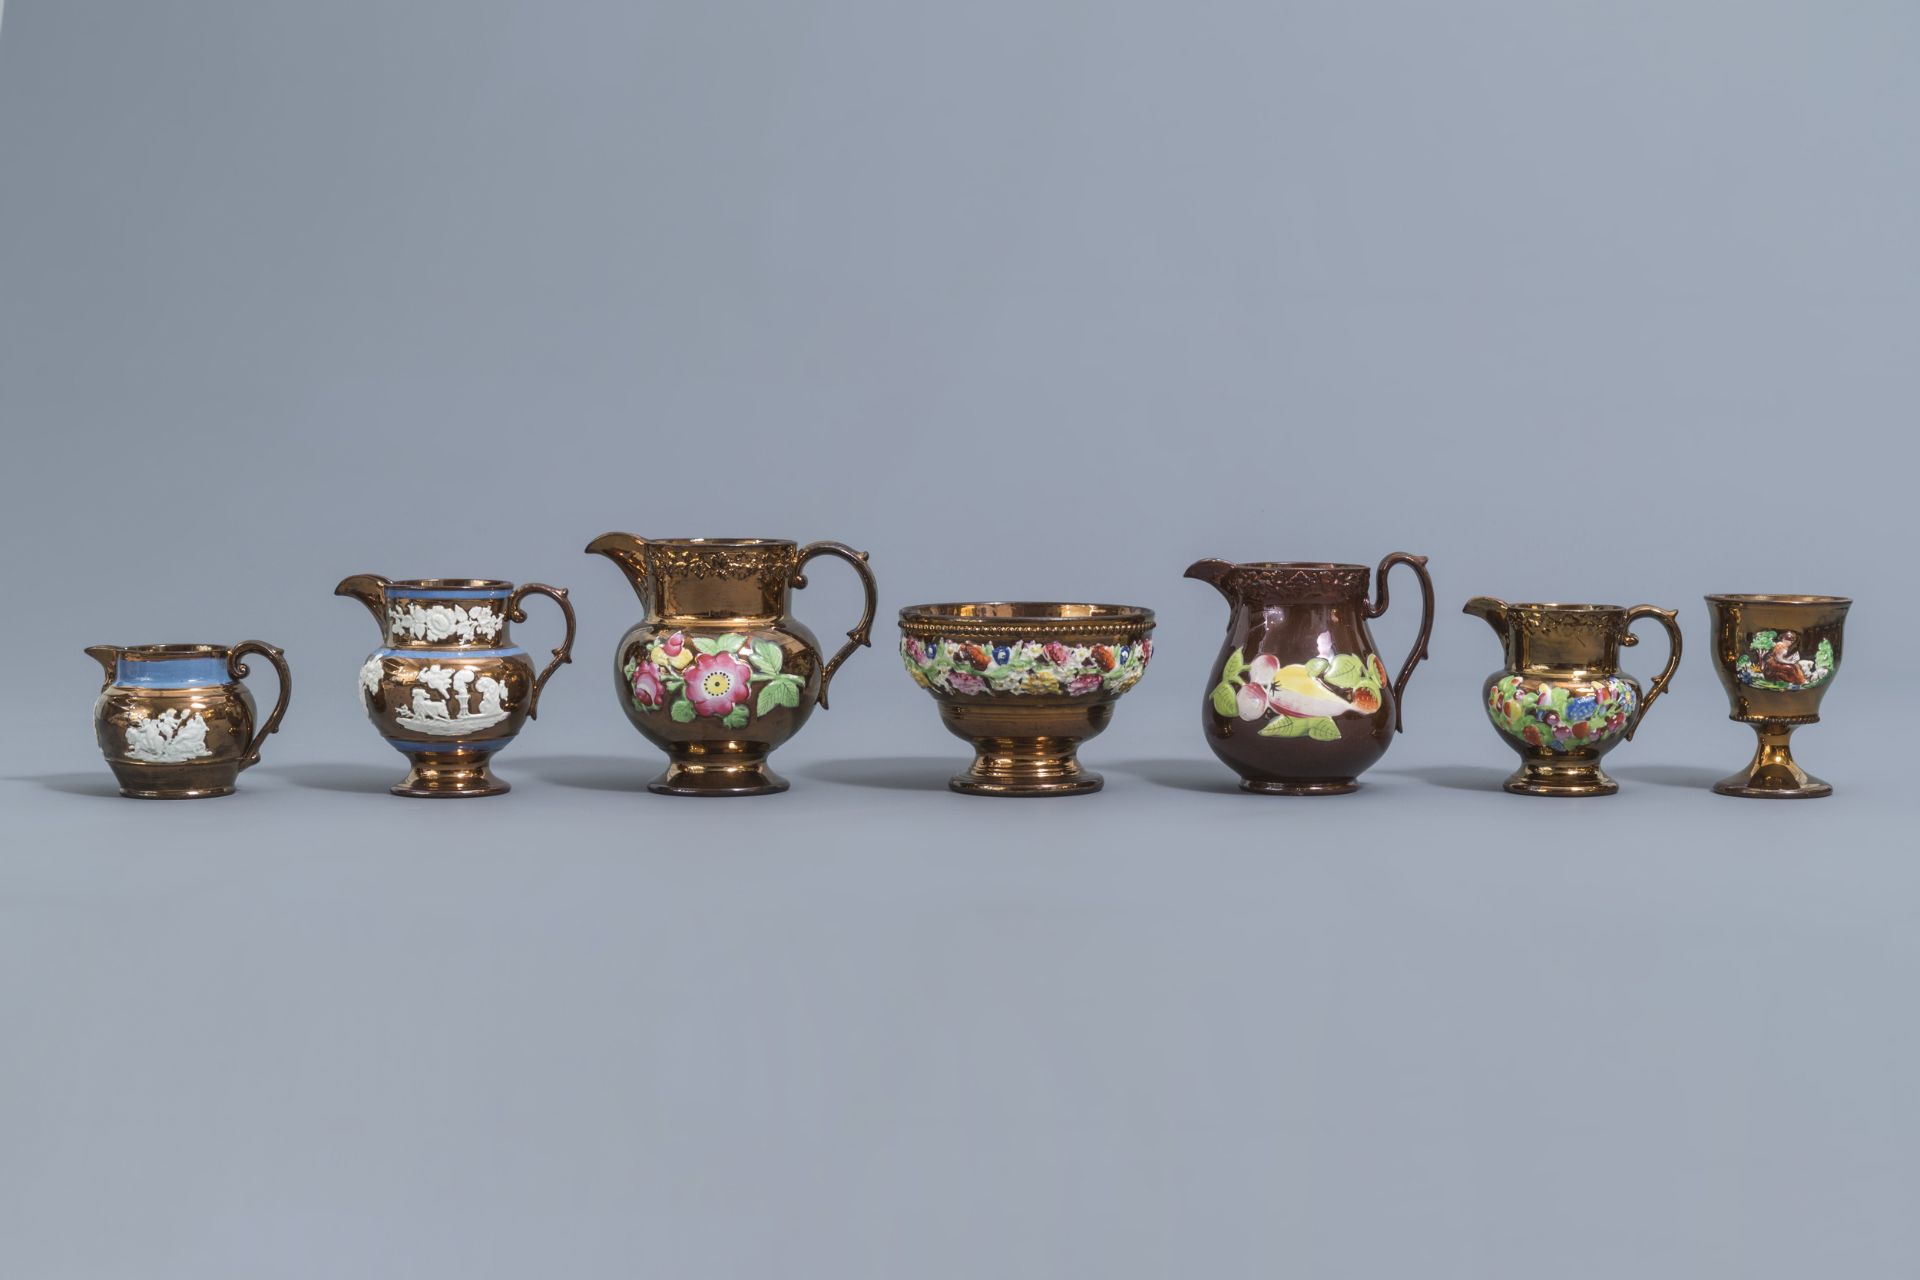 A varied collection of English lustreware items with relief design, 19th C. - Image 8 of 50